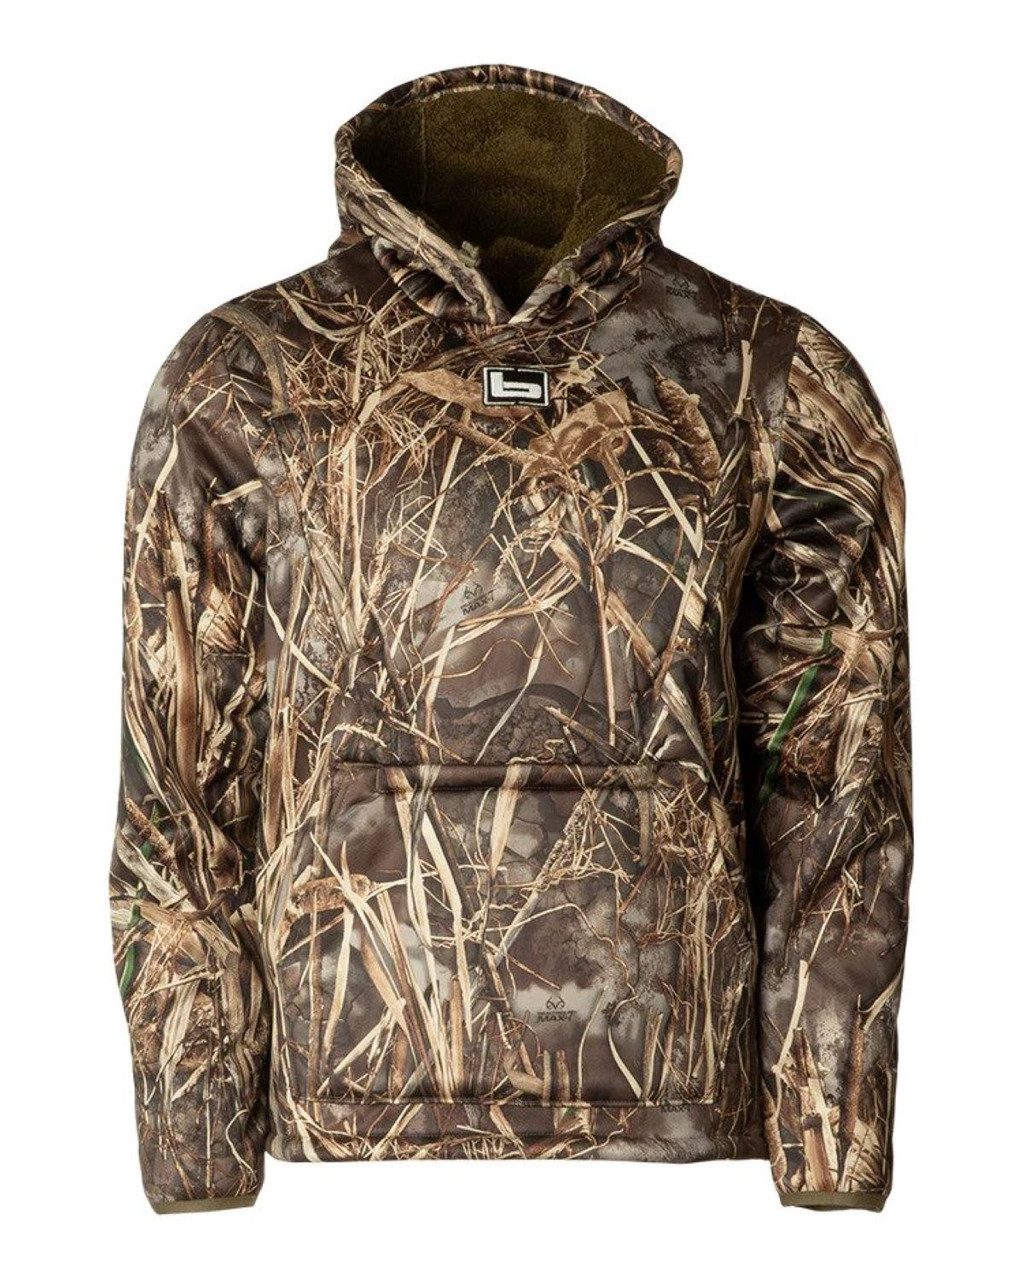 Banded Fanatech Softshell Hoodie Coral-Fleeced Lined - Realtree Max-7 - 2XL